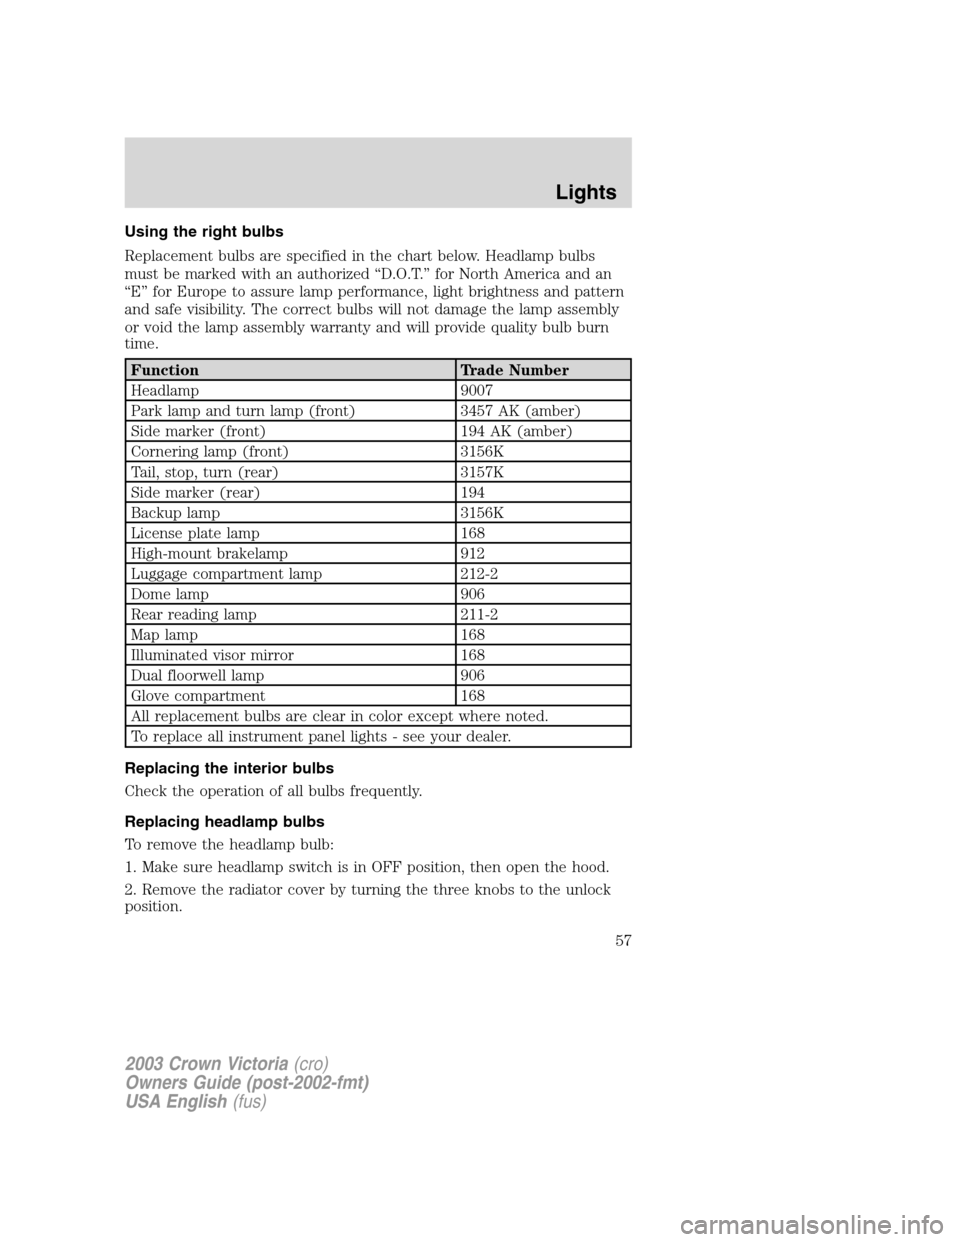 FORD CROWN VICTORIA 2003 2.G Owners Manual Using the right bulbs
Replacement bulbs are specified in the chart below. Headlamp bulbs
must be marked with an authorized“D.O.T.”for North America and an
“E”for Europe to assure lamp performa